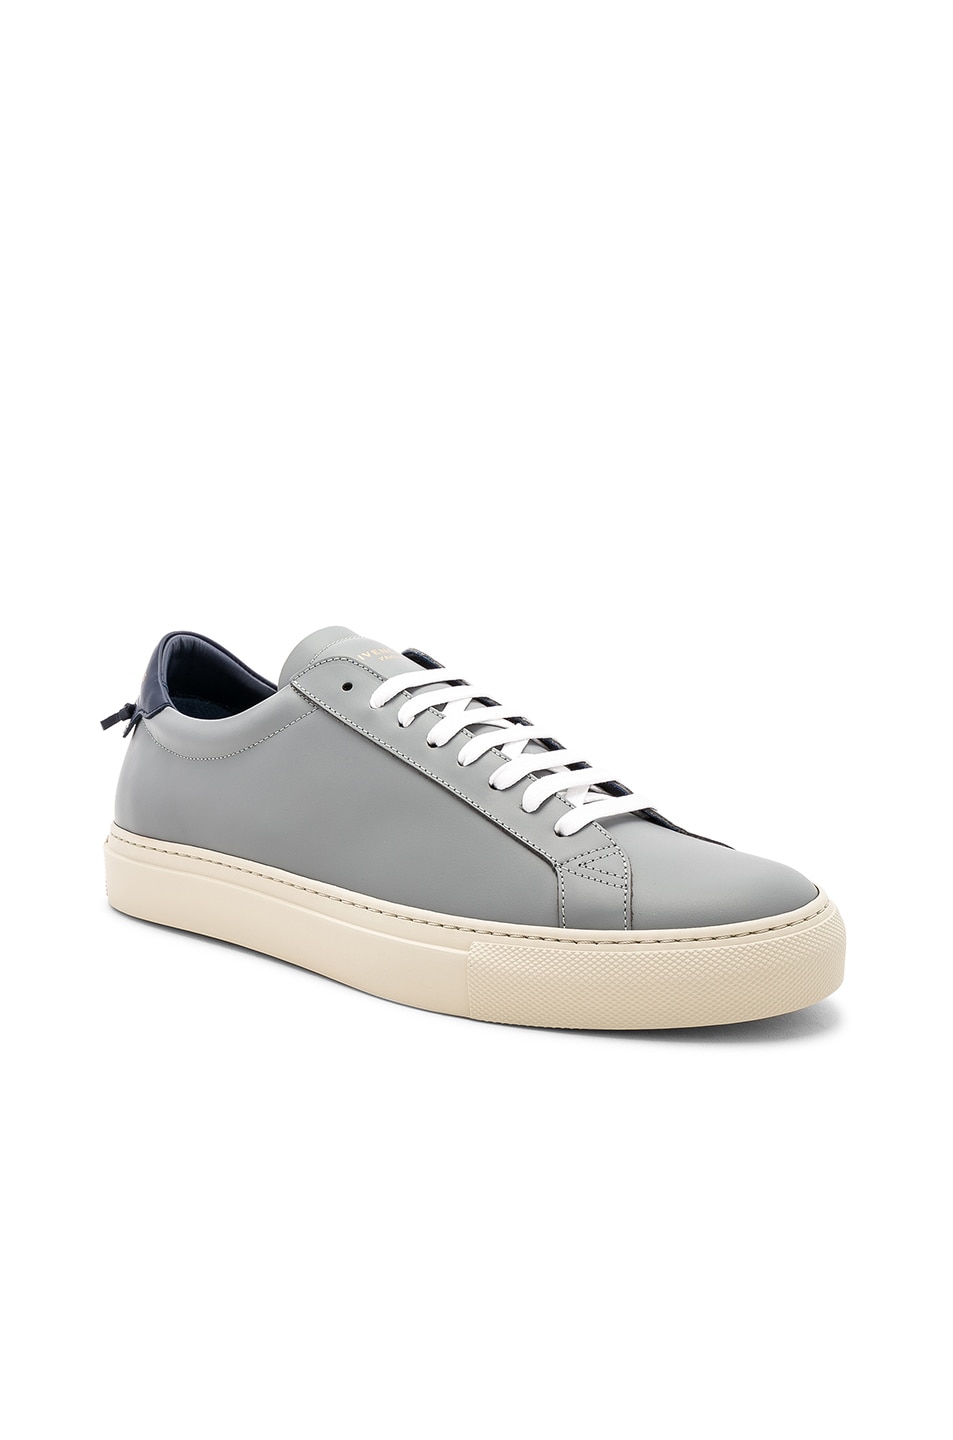 Image 1 of Givenchy Leather Urban Street Sneakers in Grey & Blue